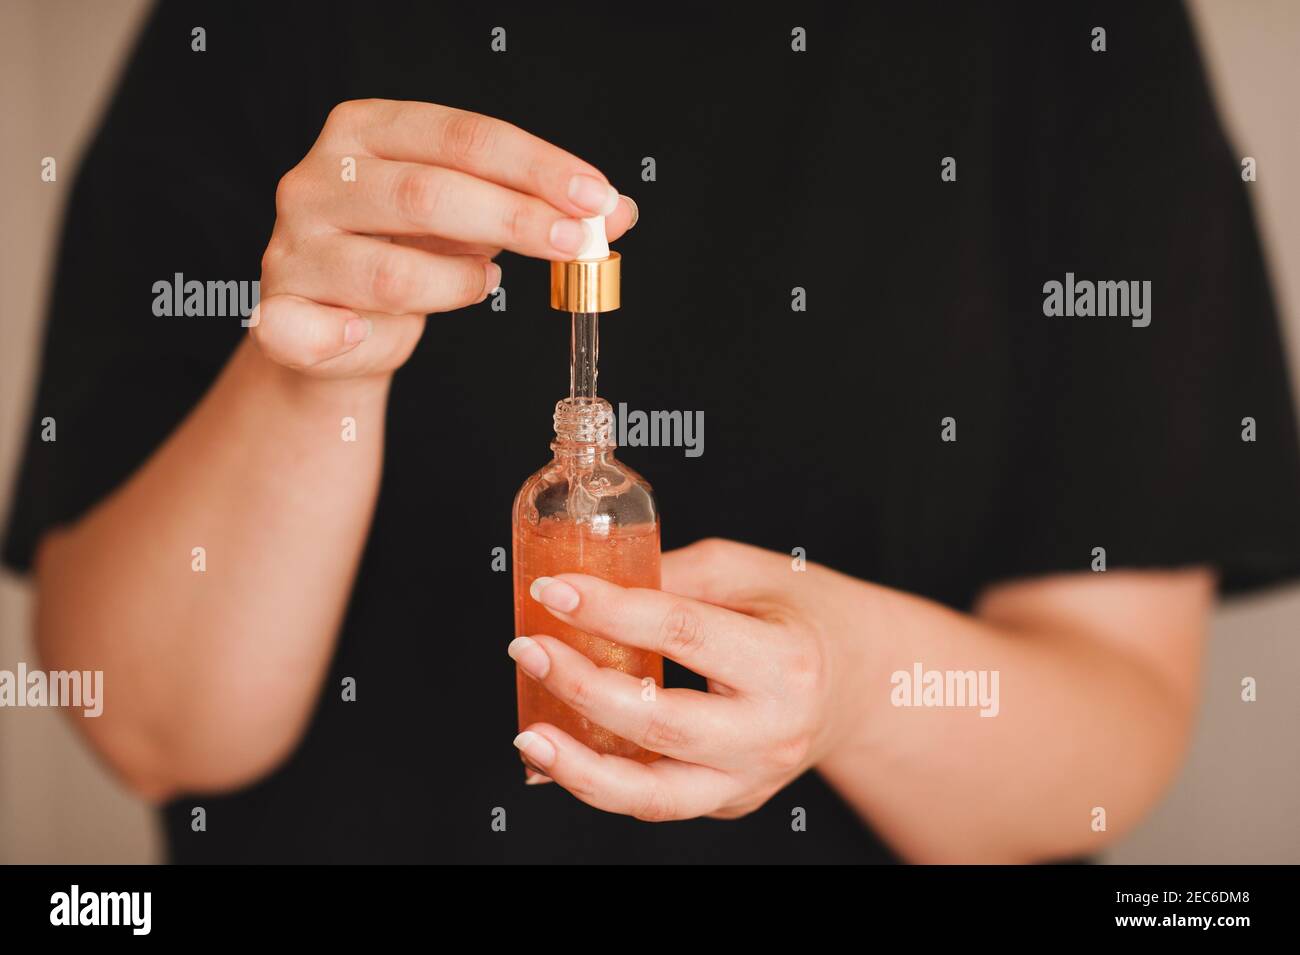 Woman holding moisturizing facial serum in glass bottle close up. Skin health care. Healthy lifestyle. Stock Photo